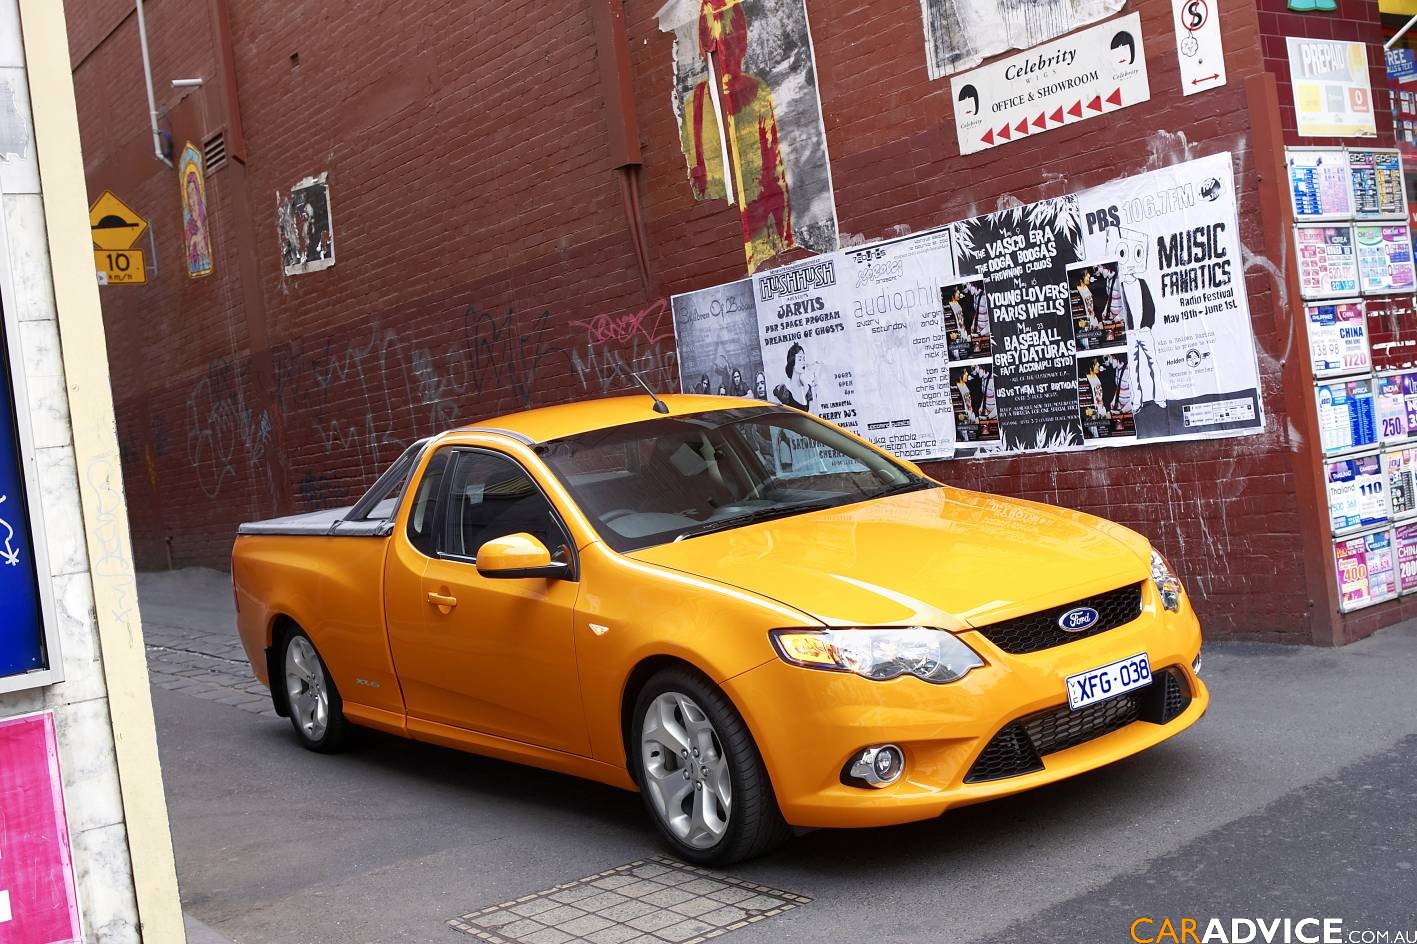 Ford Falcon Xr6 Turbo Ute Fg Picture 2 Reviews News Specs